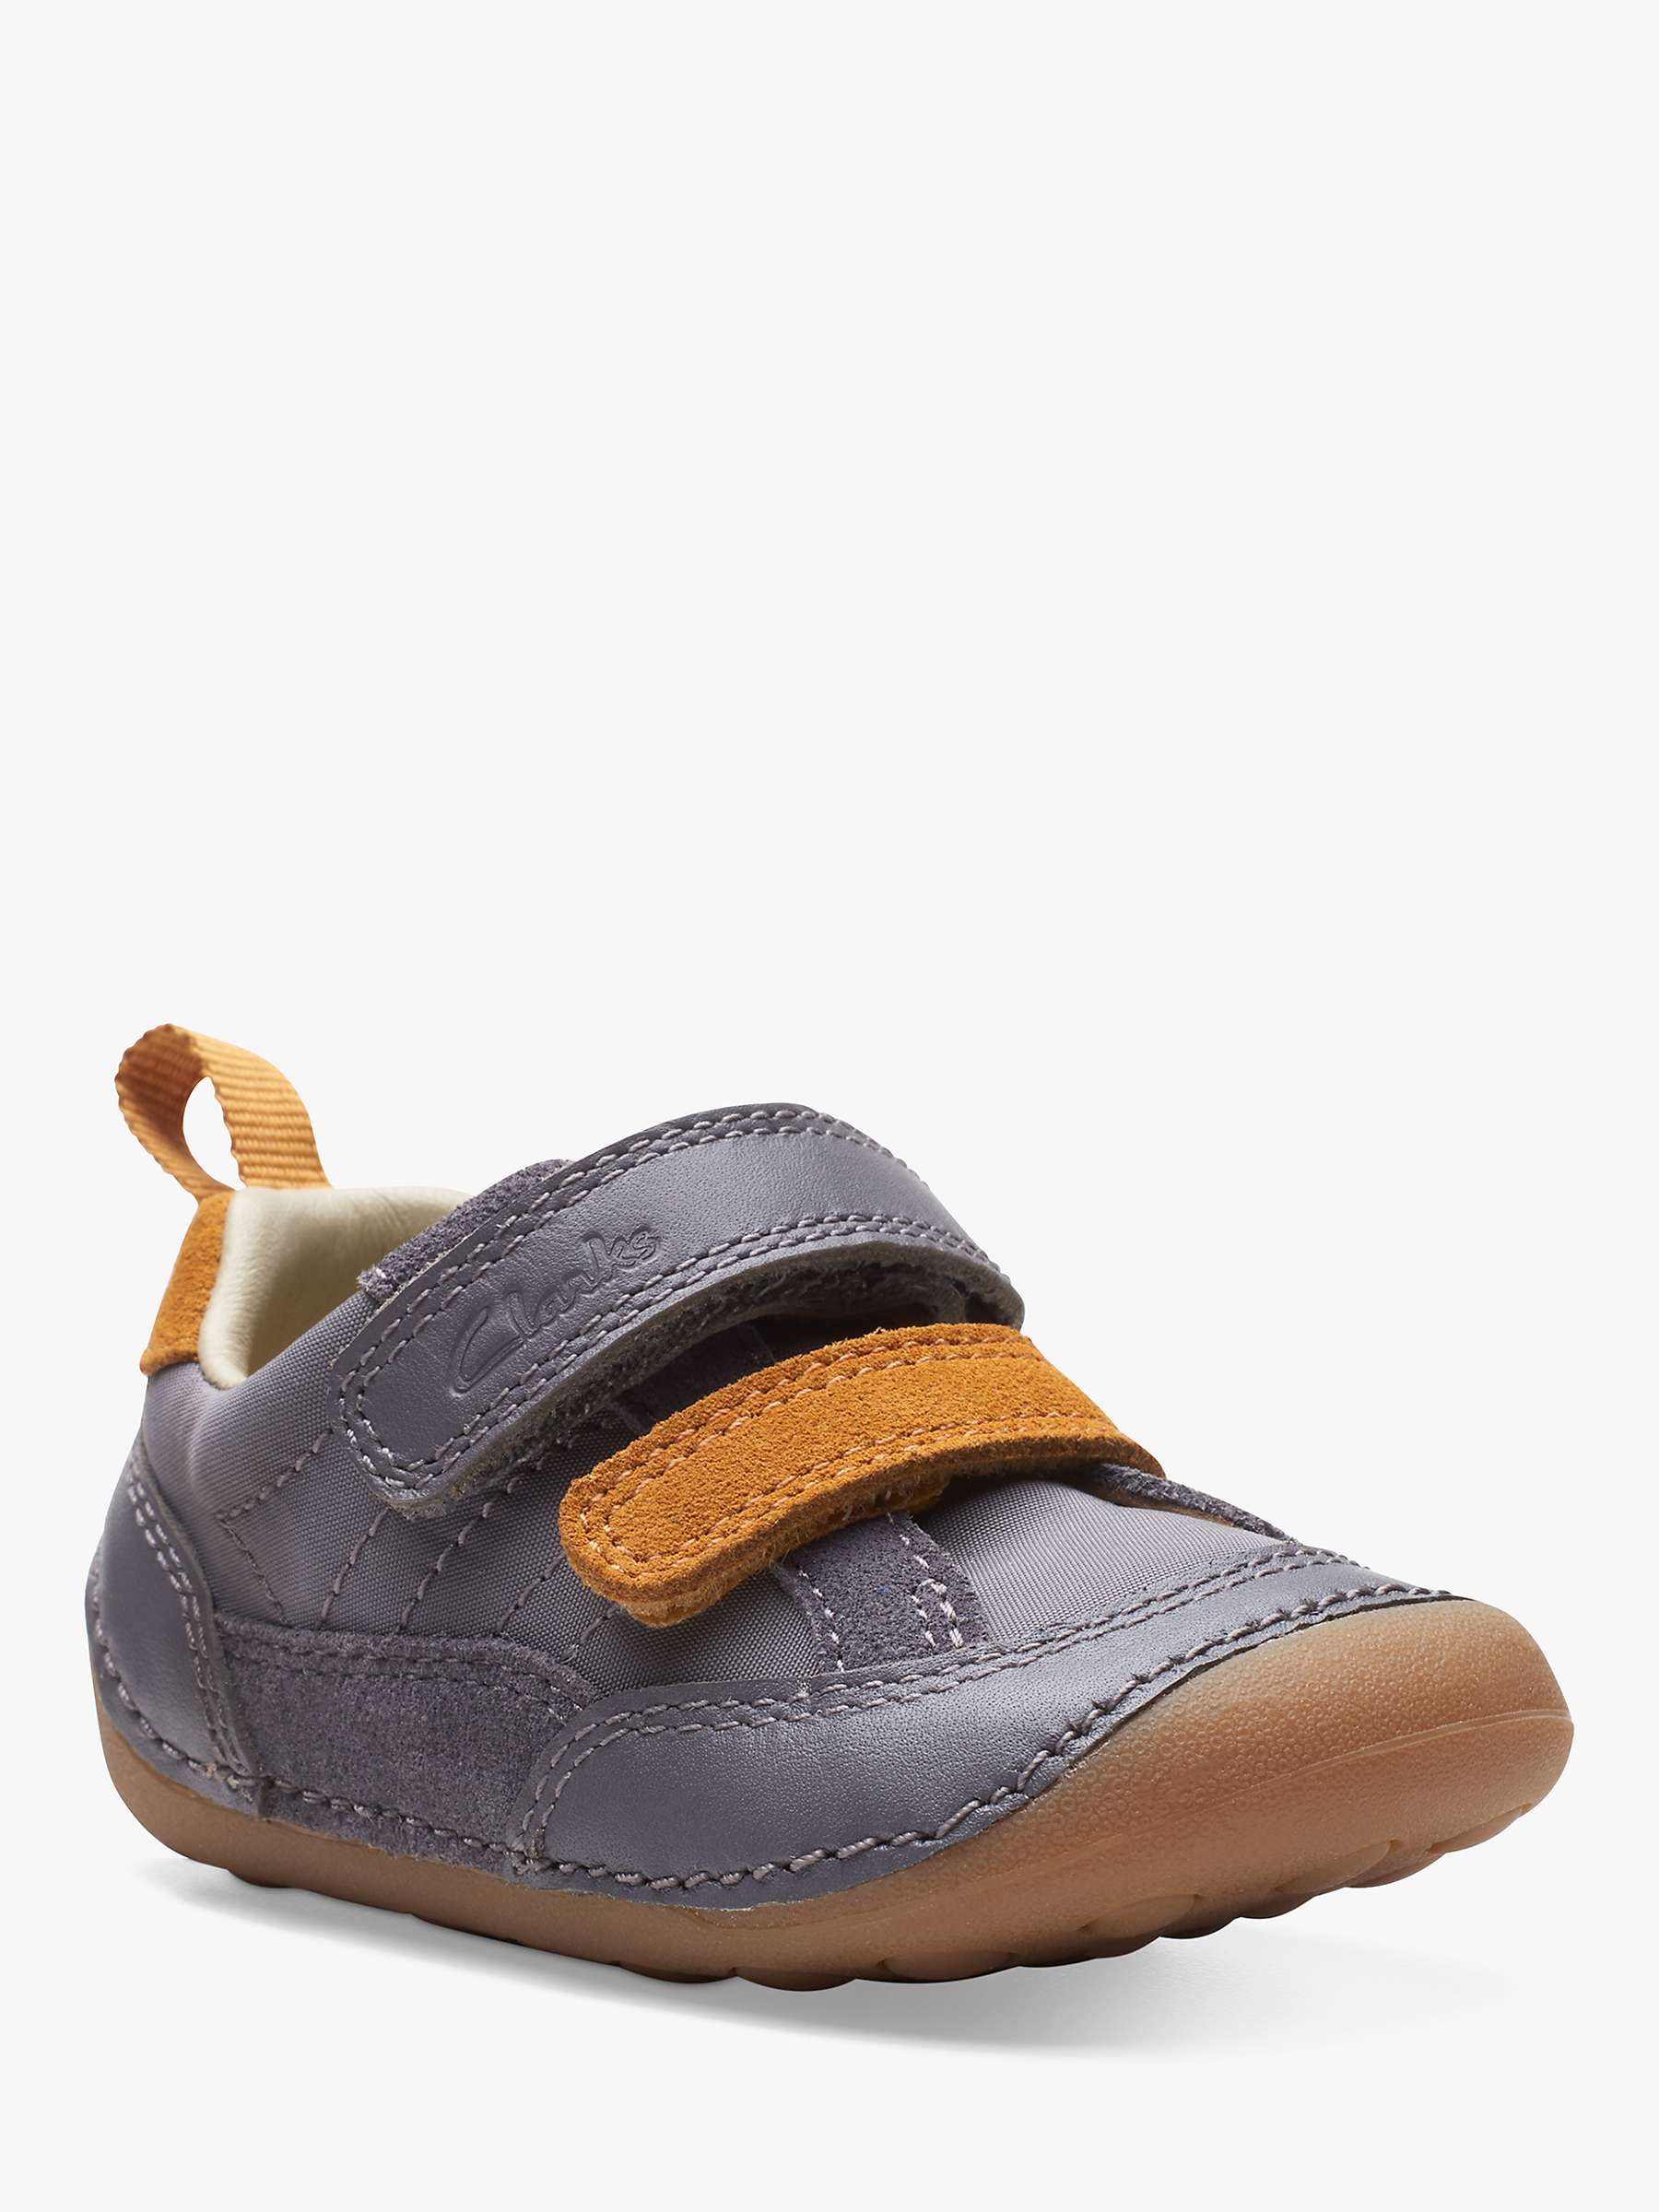 Buy Clarks Baby Tiny Fawn Pre-Walker Shoes, Grey/Tan Online at johnlewis.com